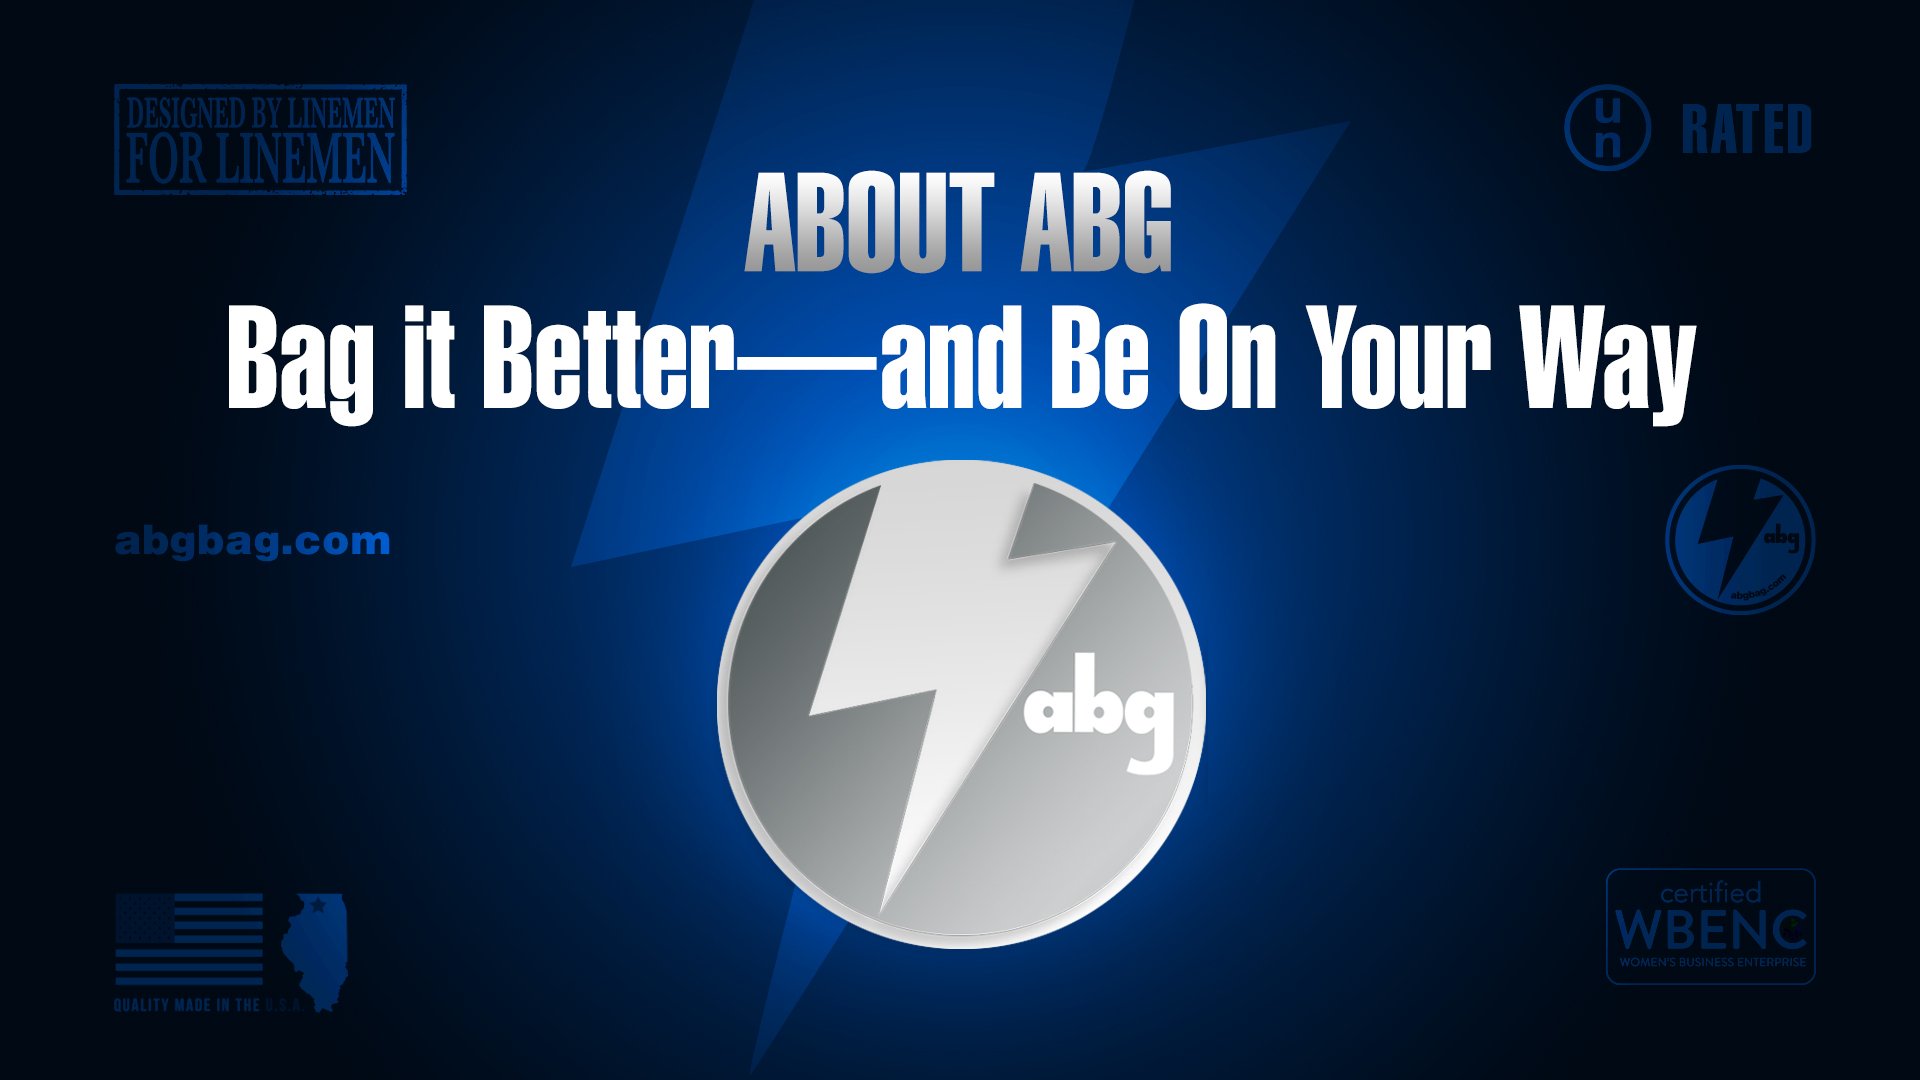 2021_ABG_About_Bag-It-Better_transformer-containment-bags-spill-prevention